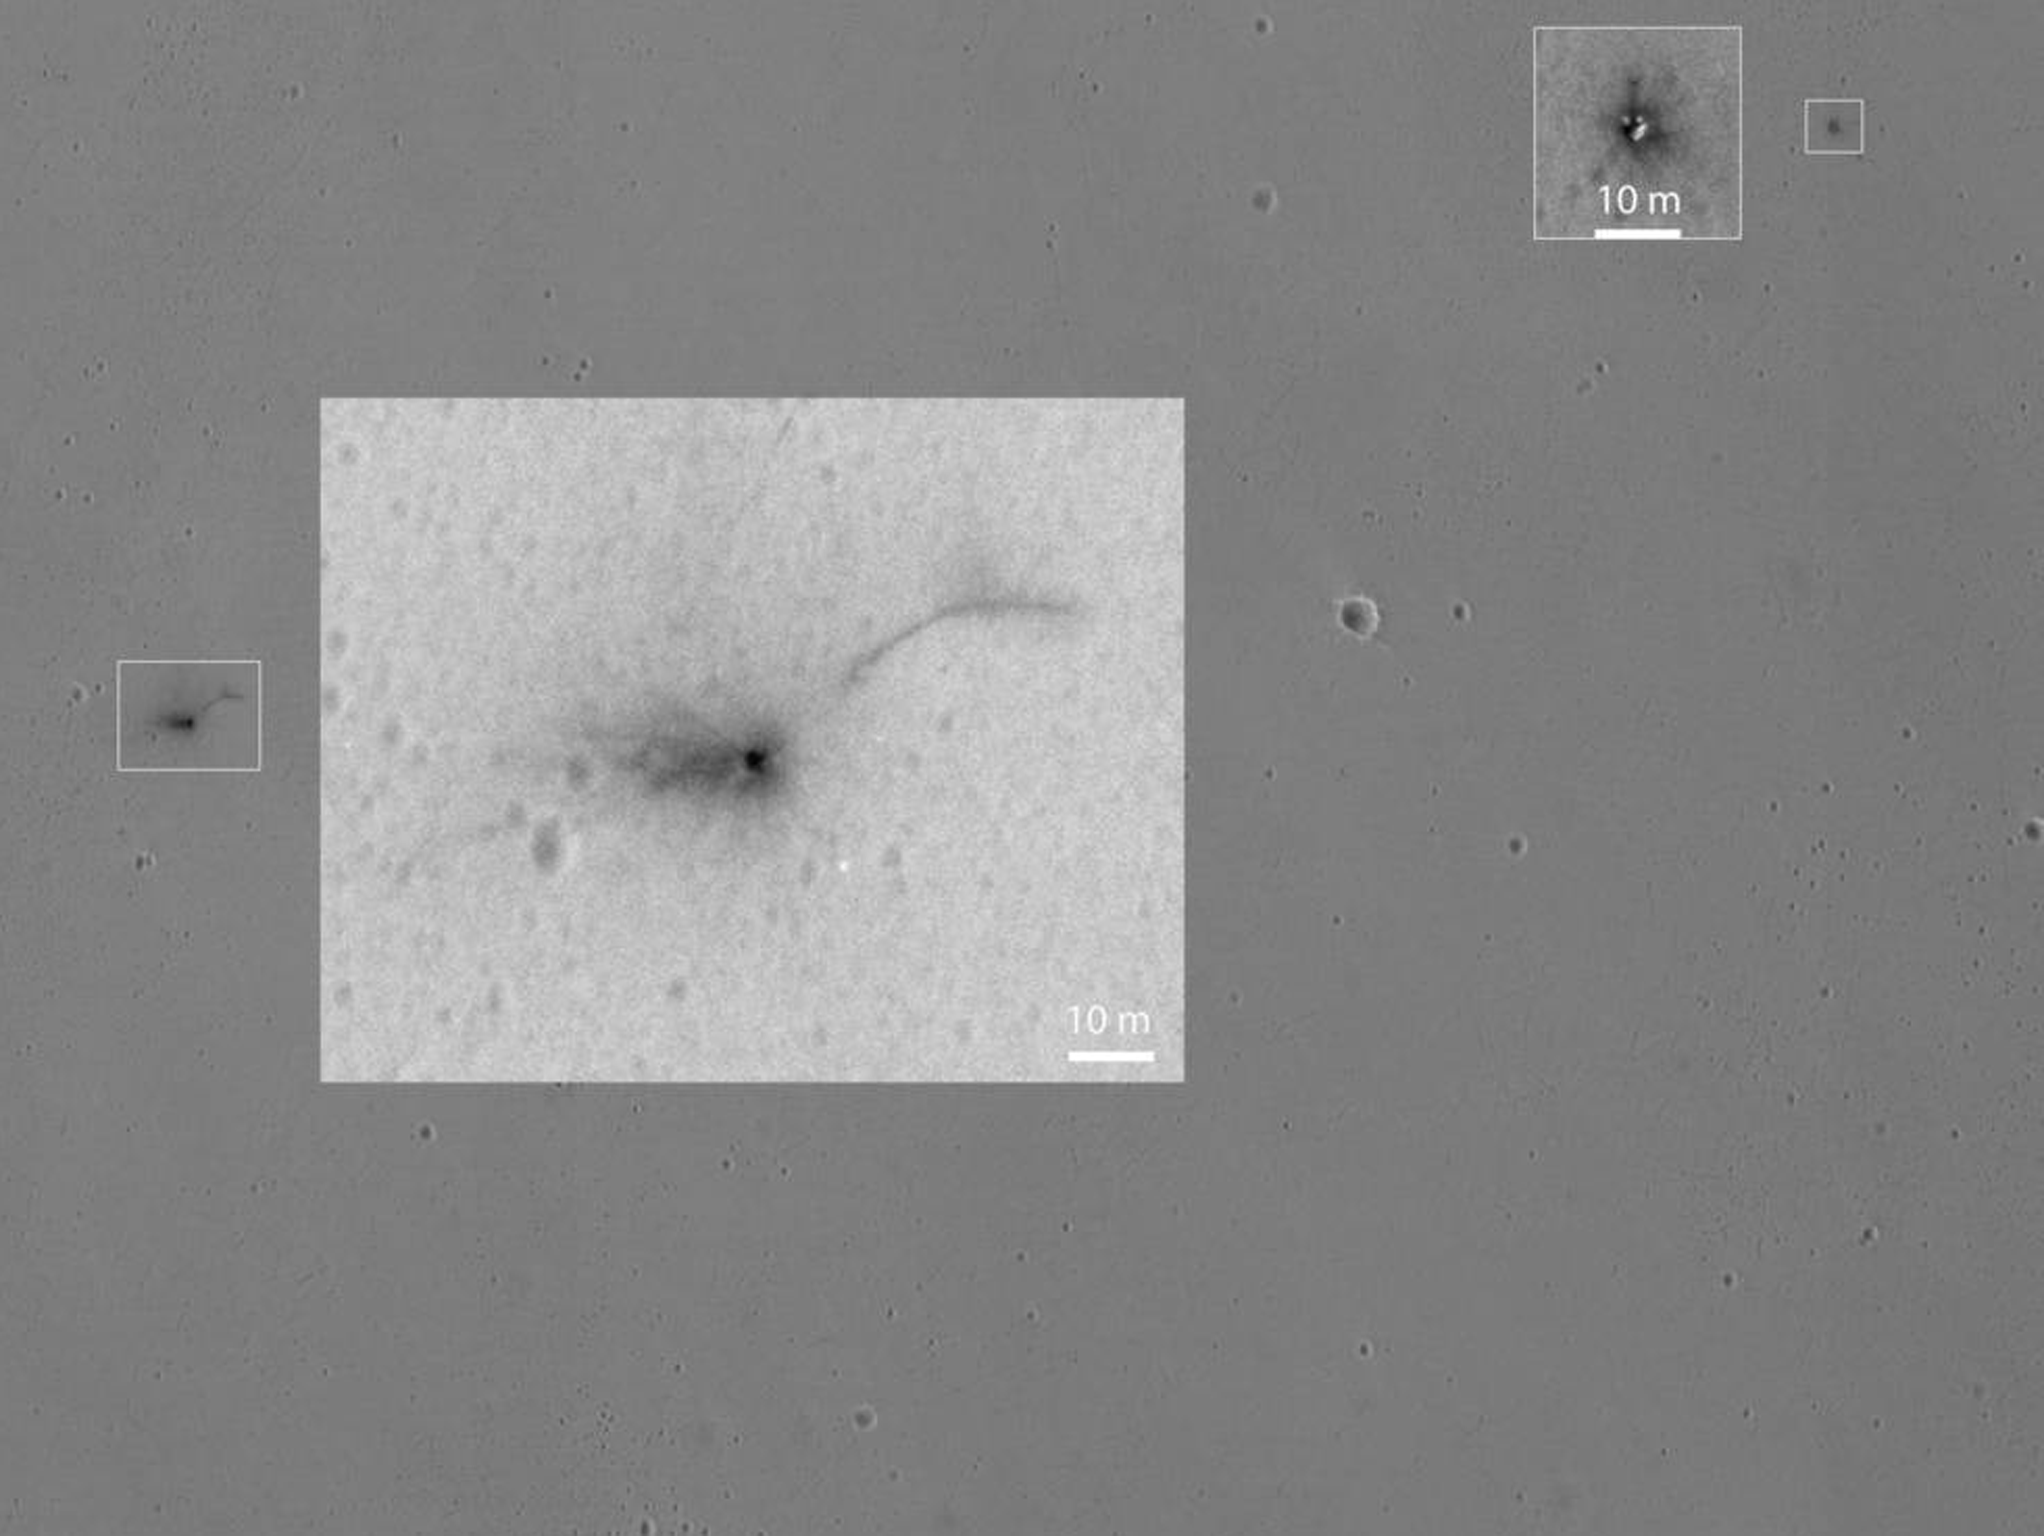 Images show the area where the European Space Agency's Schiaparelli test lander reached the surface of Mars